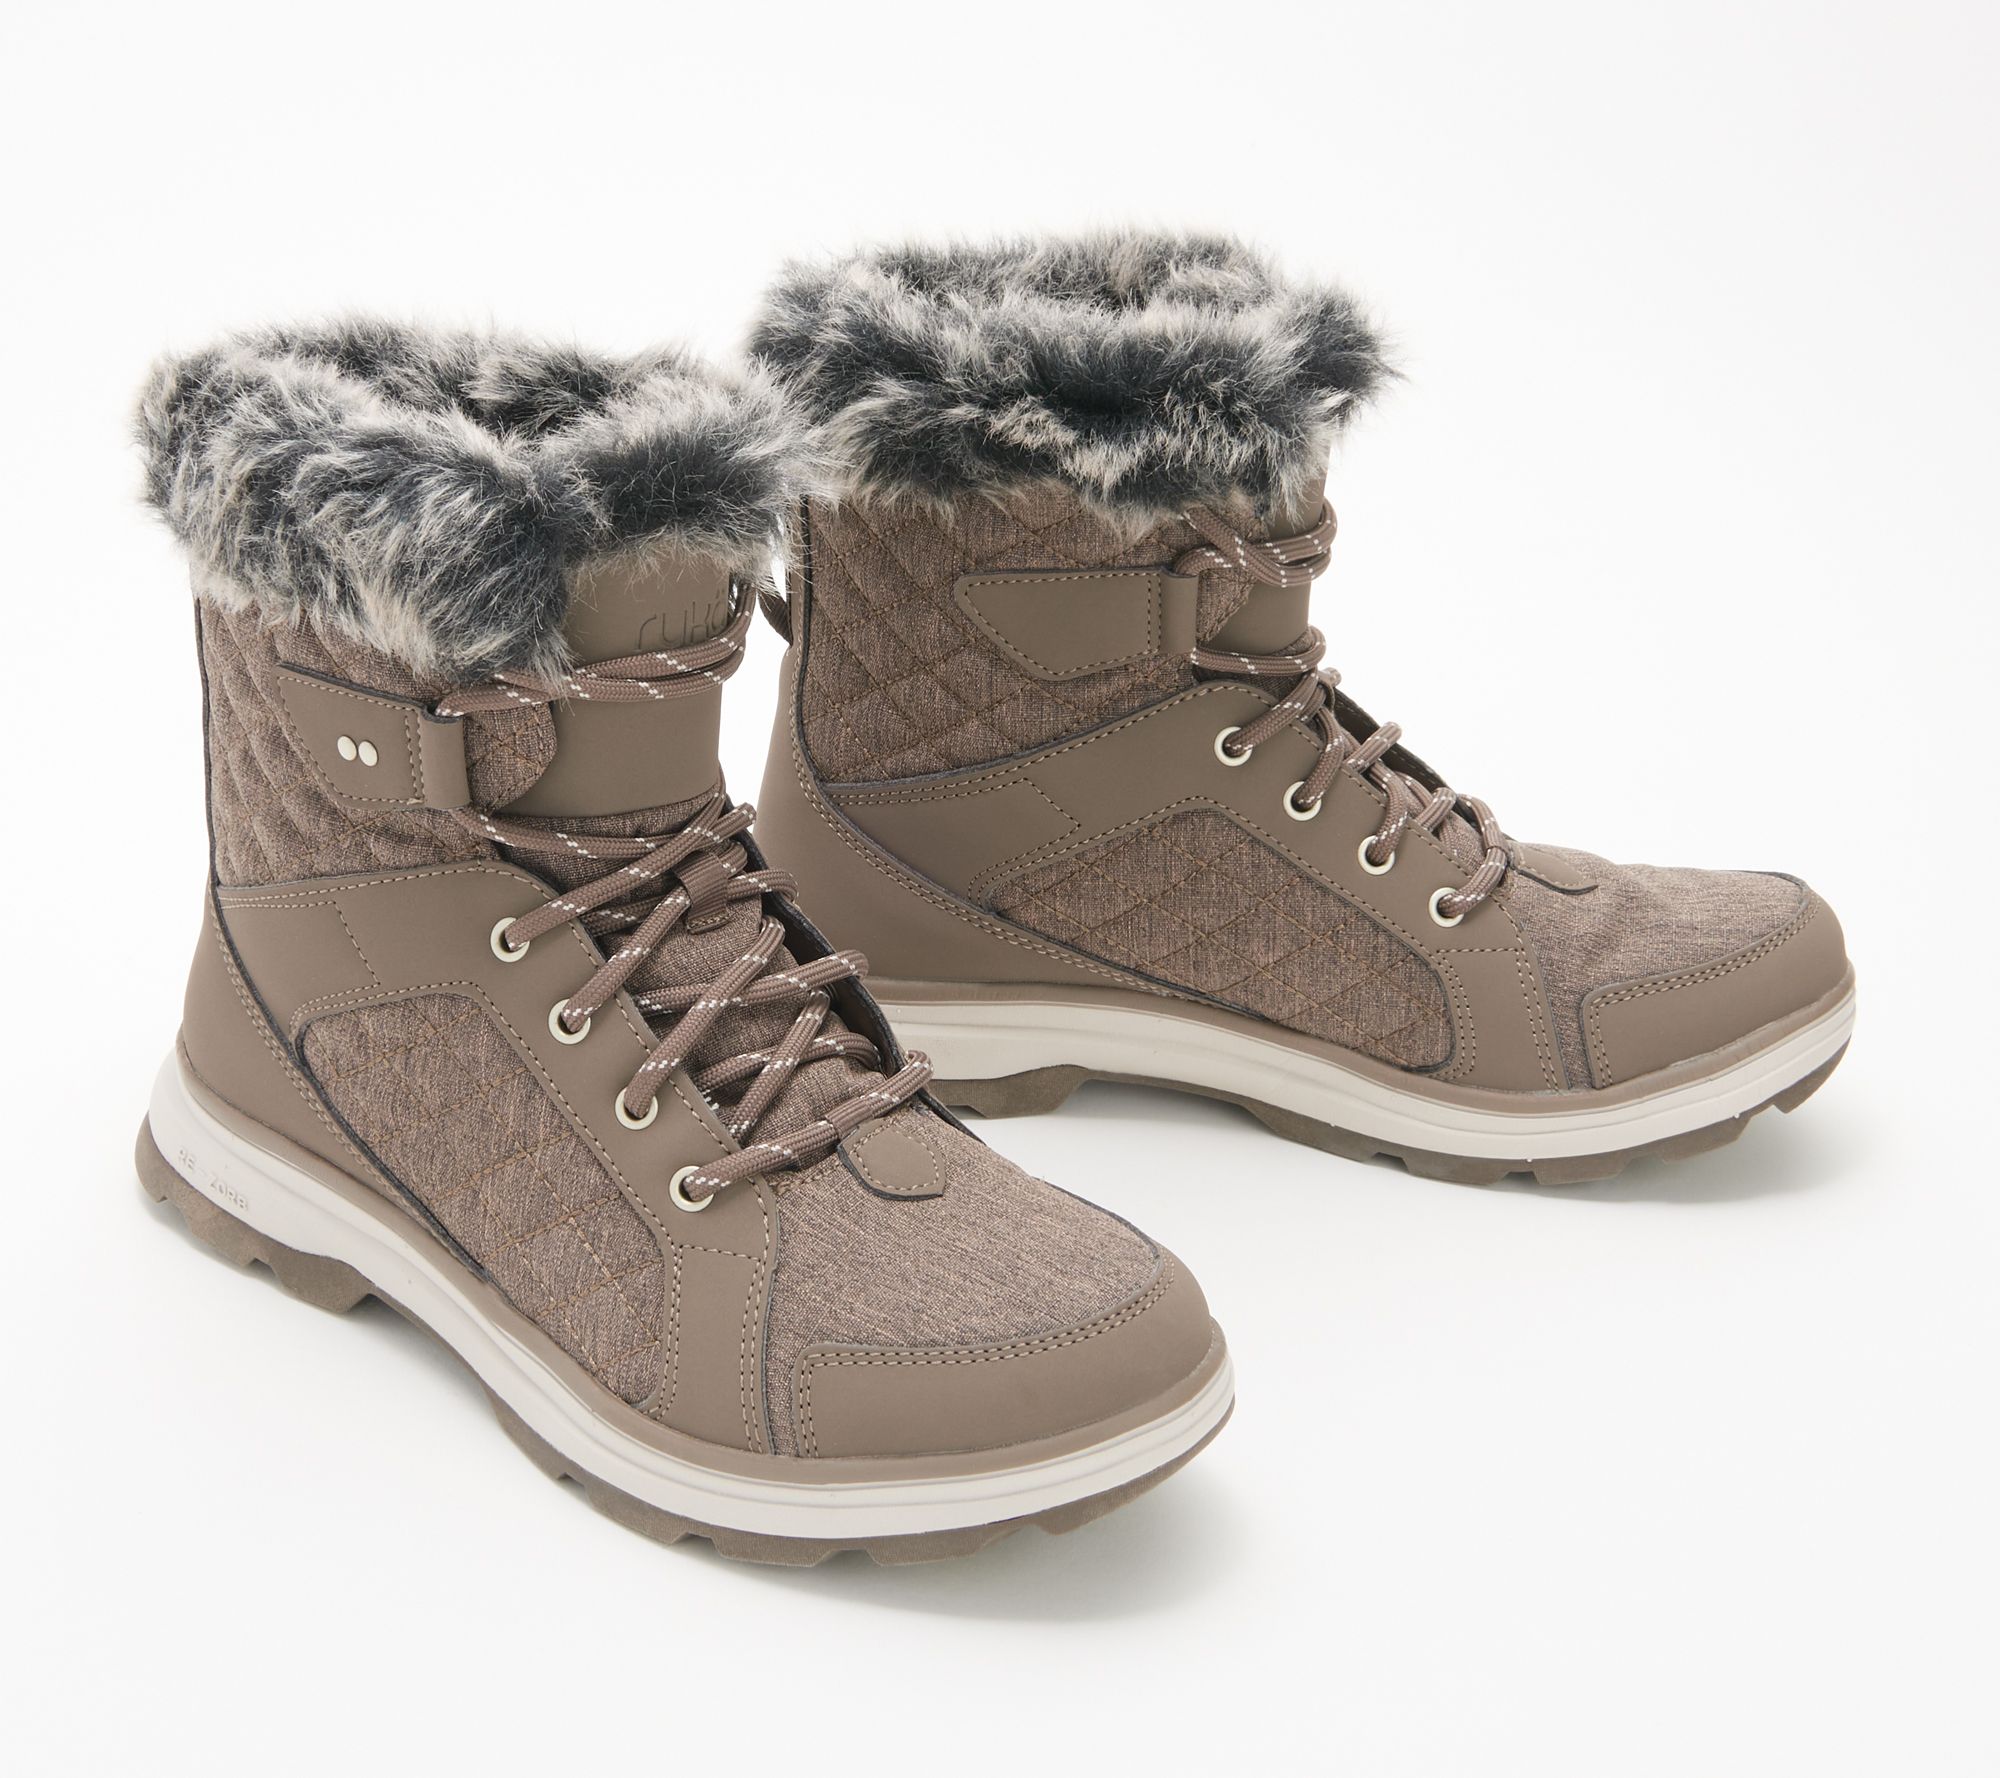 LADIES FAUX FUR GRIP SOLE WINTER WARM ANKLE WOMENS BOOTS TRAINERS SHOES SIZE 3-8 